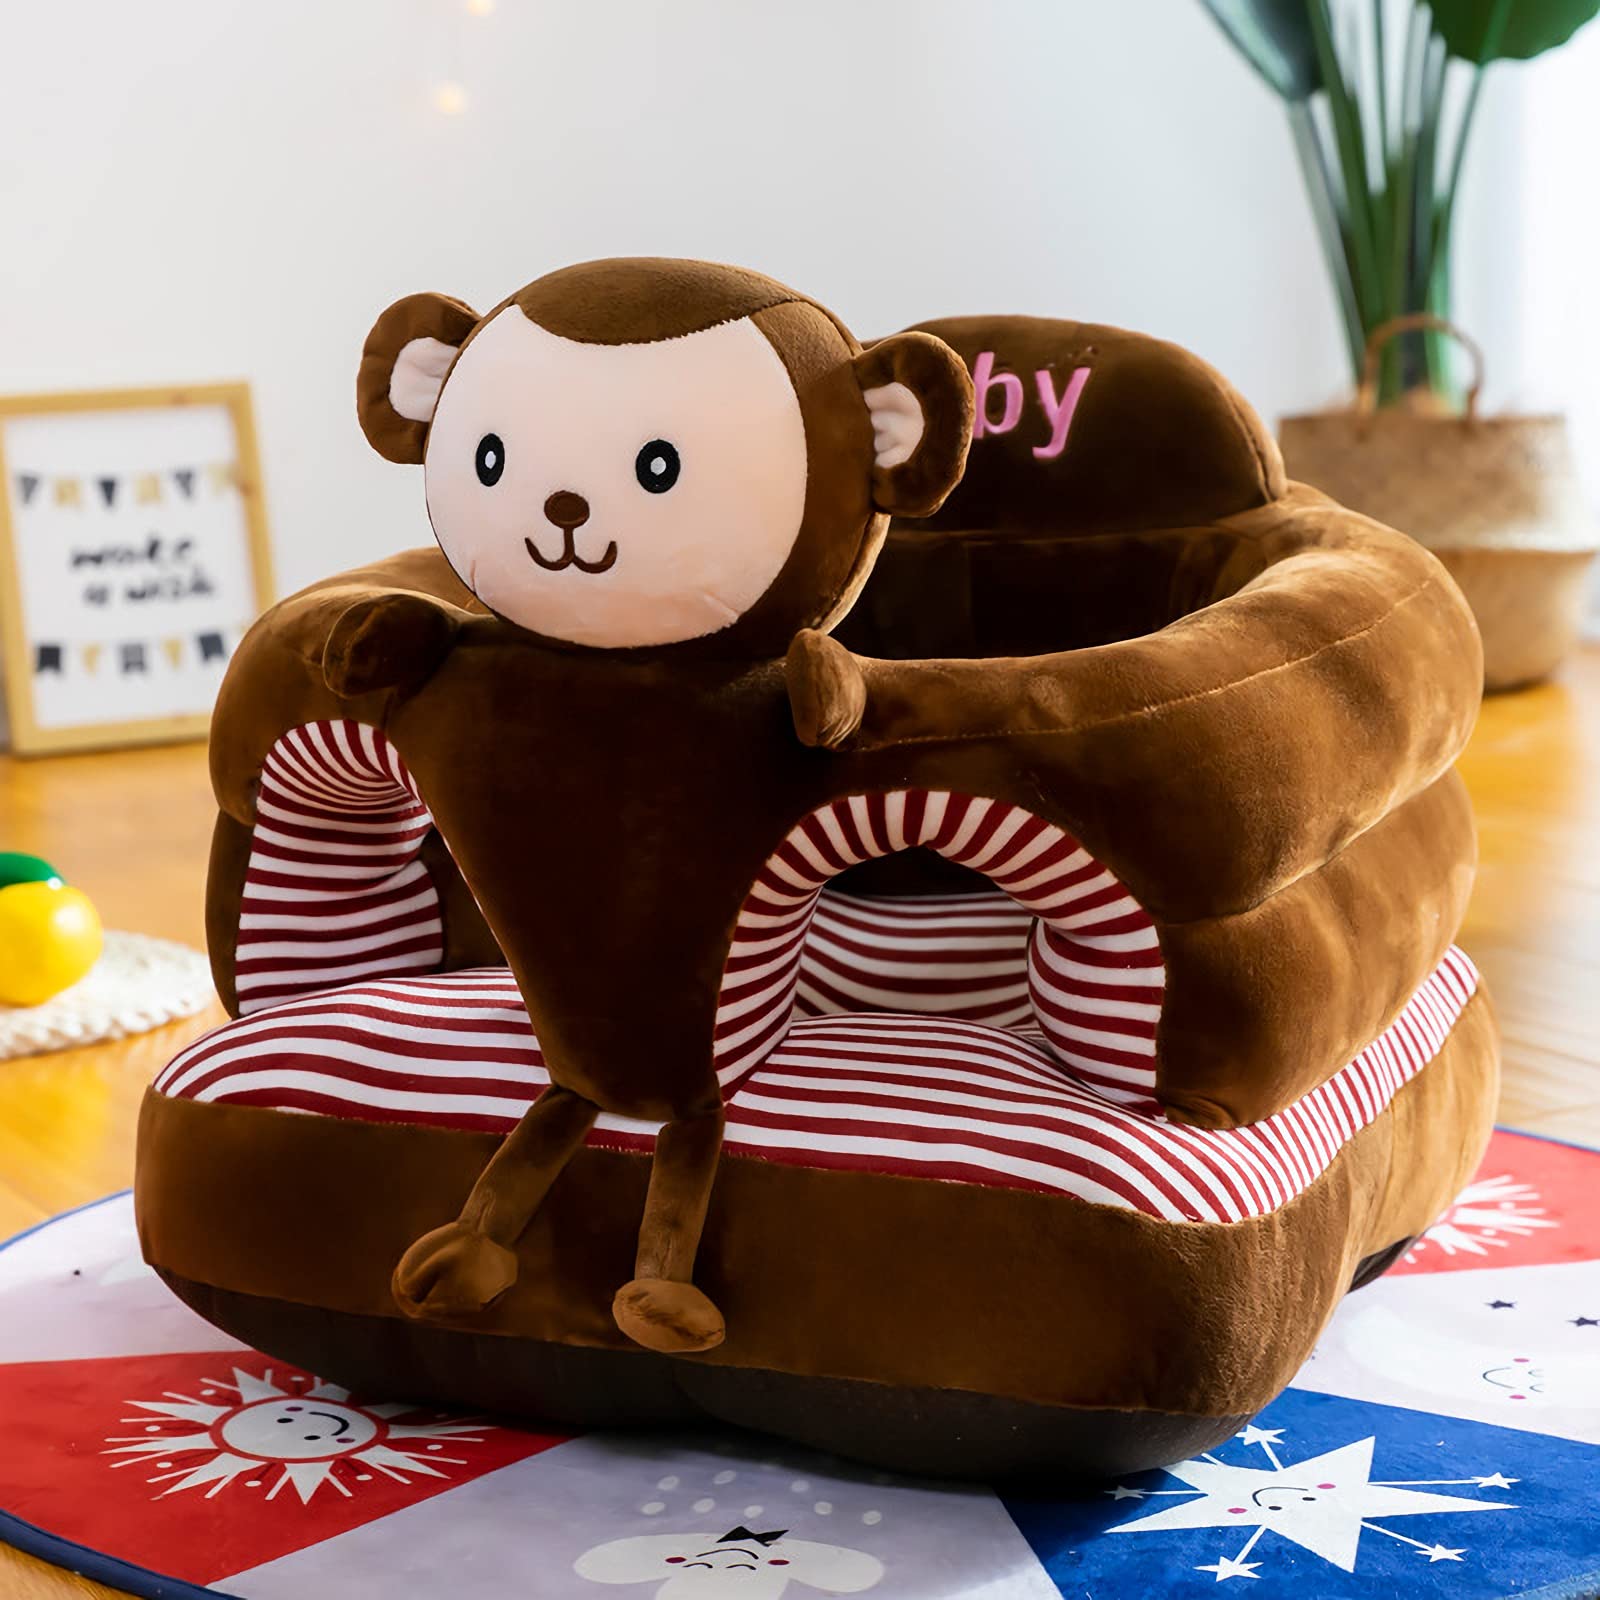 Baby Support Seat, Cute Baby Sofa Chair for Sitting Up, Comfy Plush Infant Seats (Monkey,W17.5